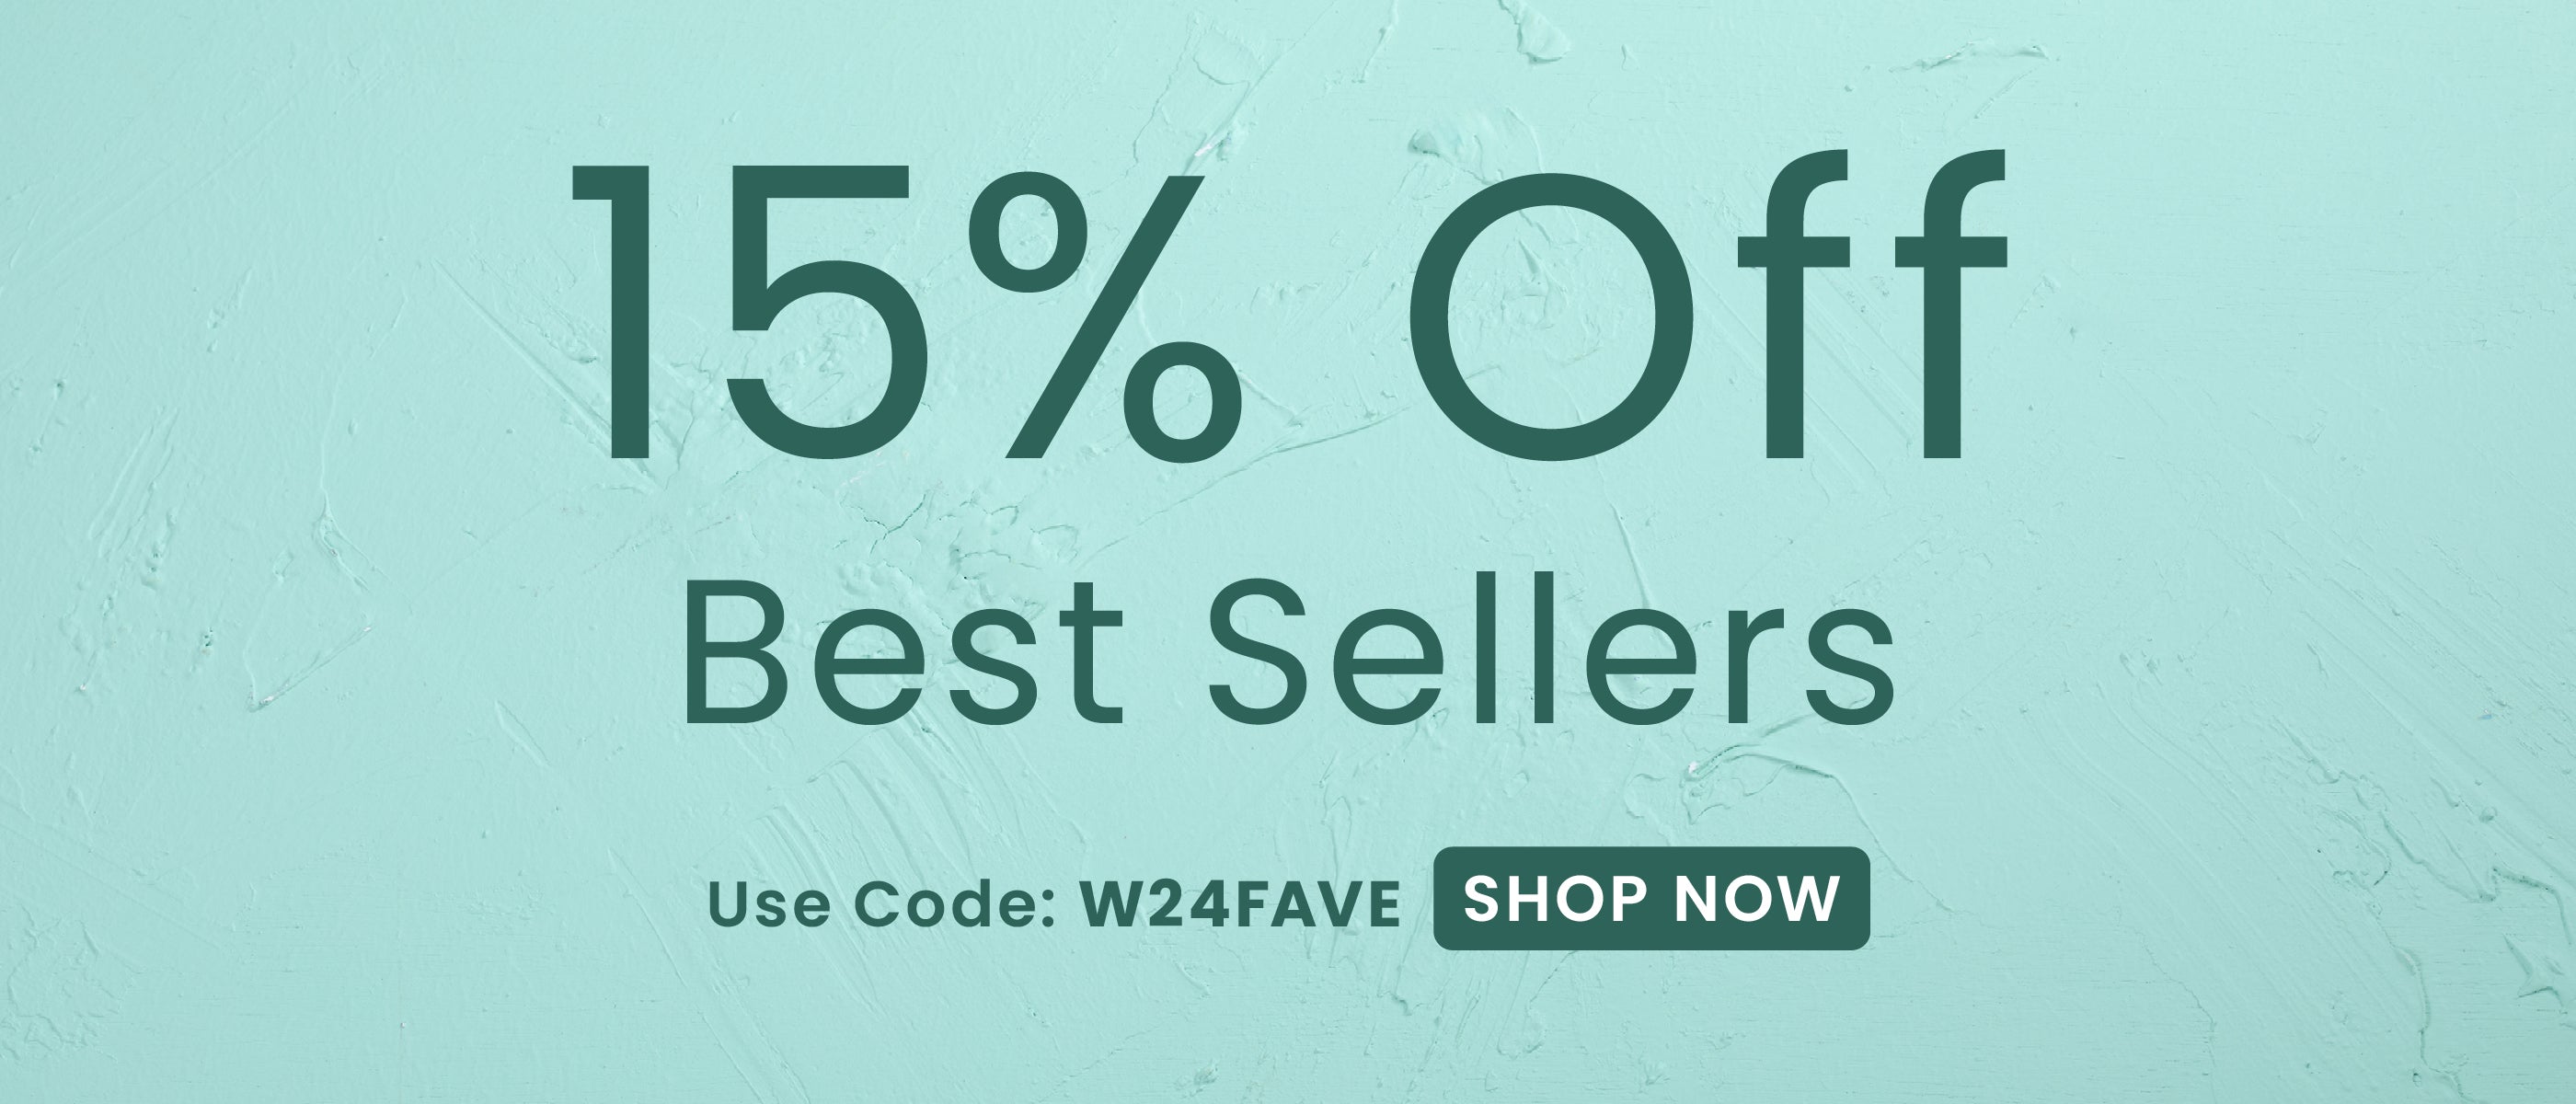 15% Off Best Sellers Use Code: W24FAVE